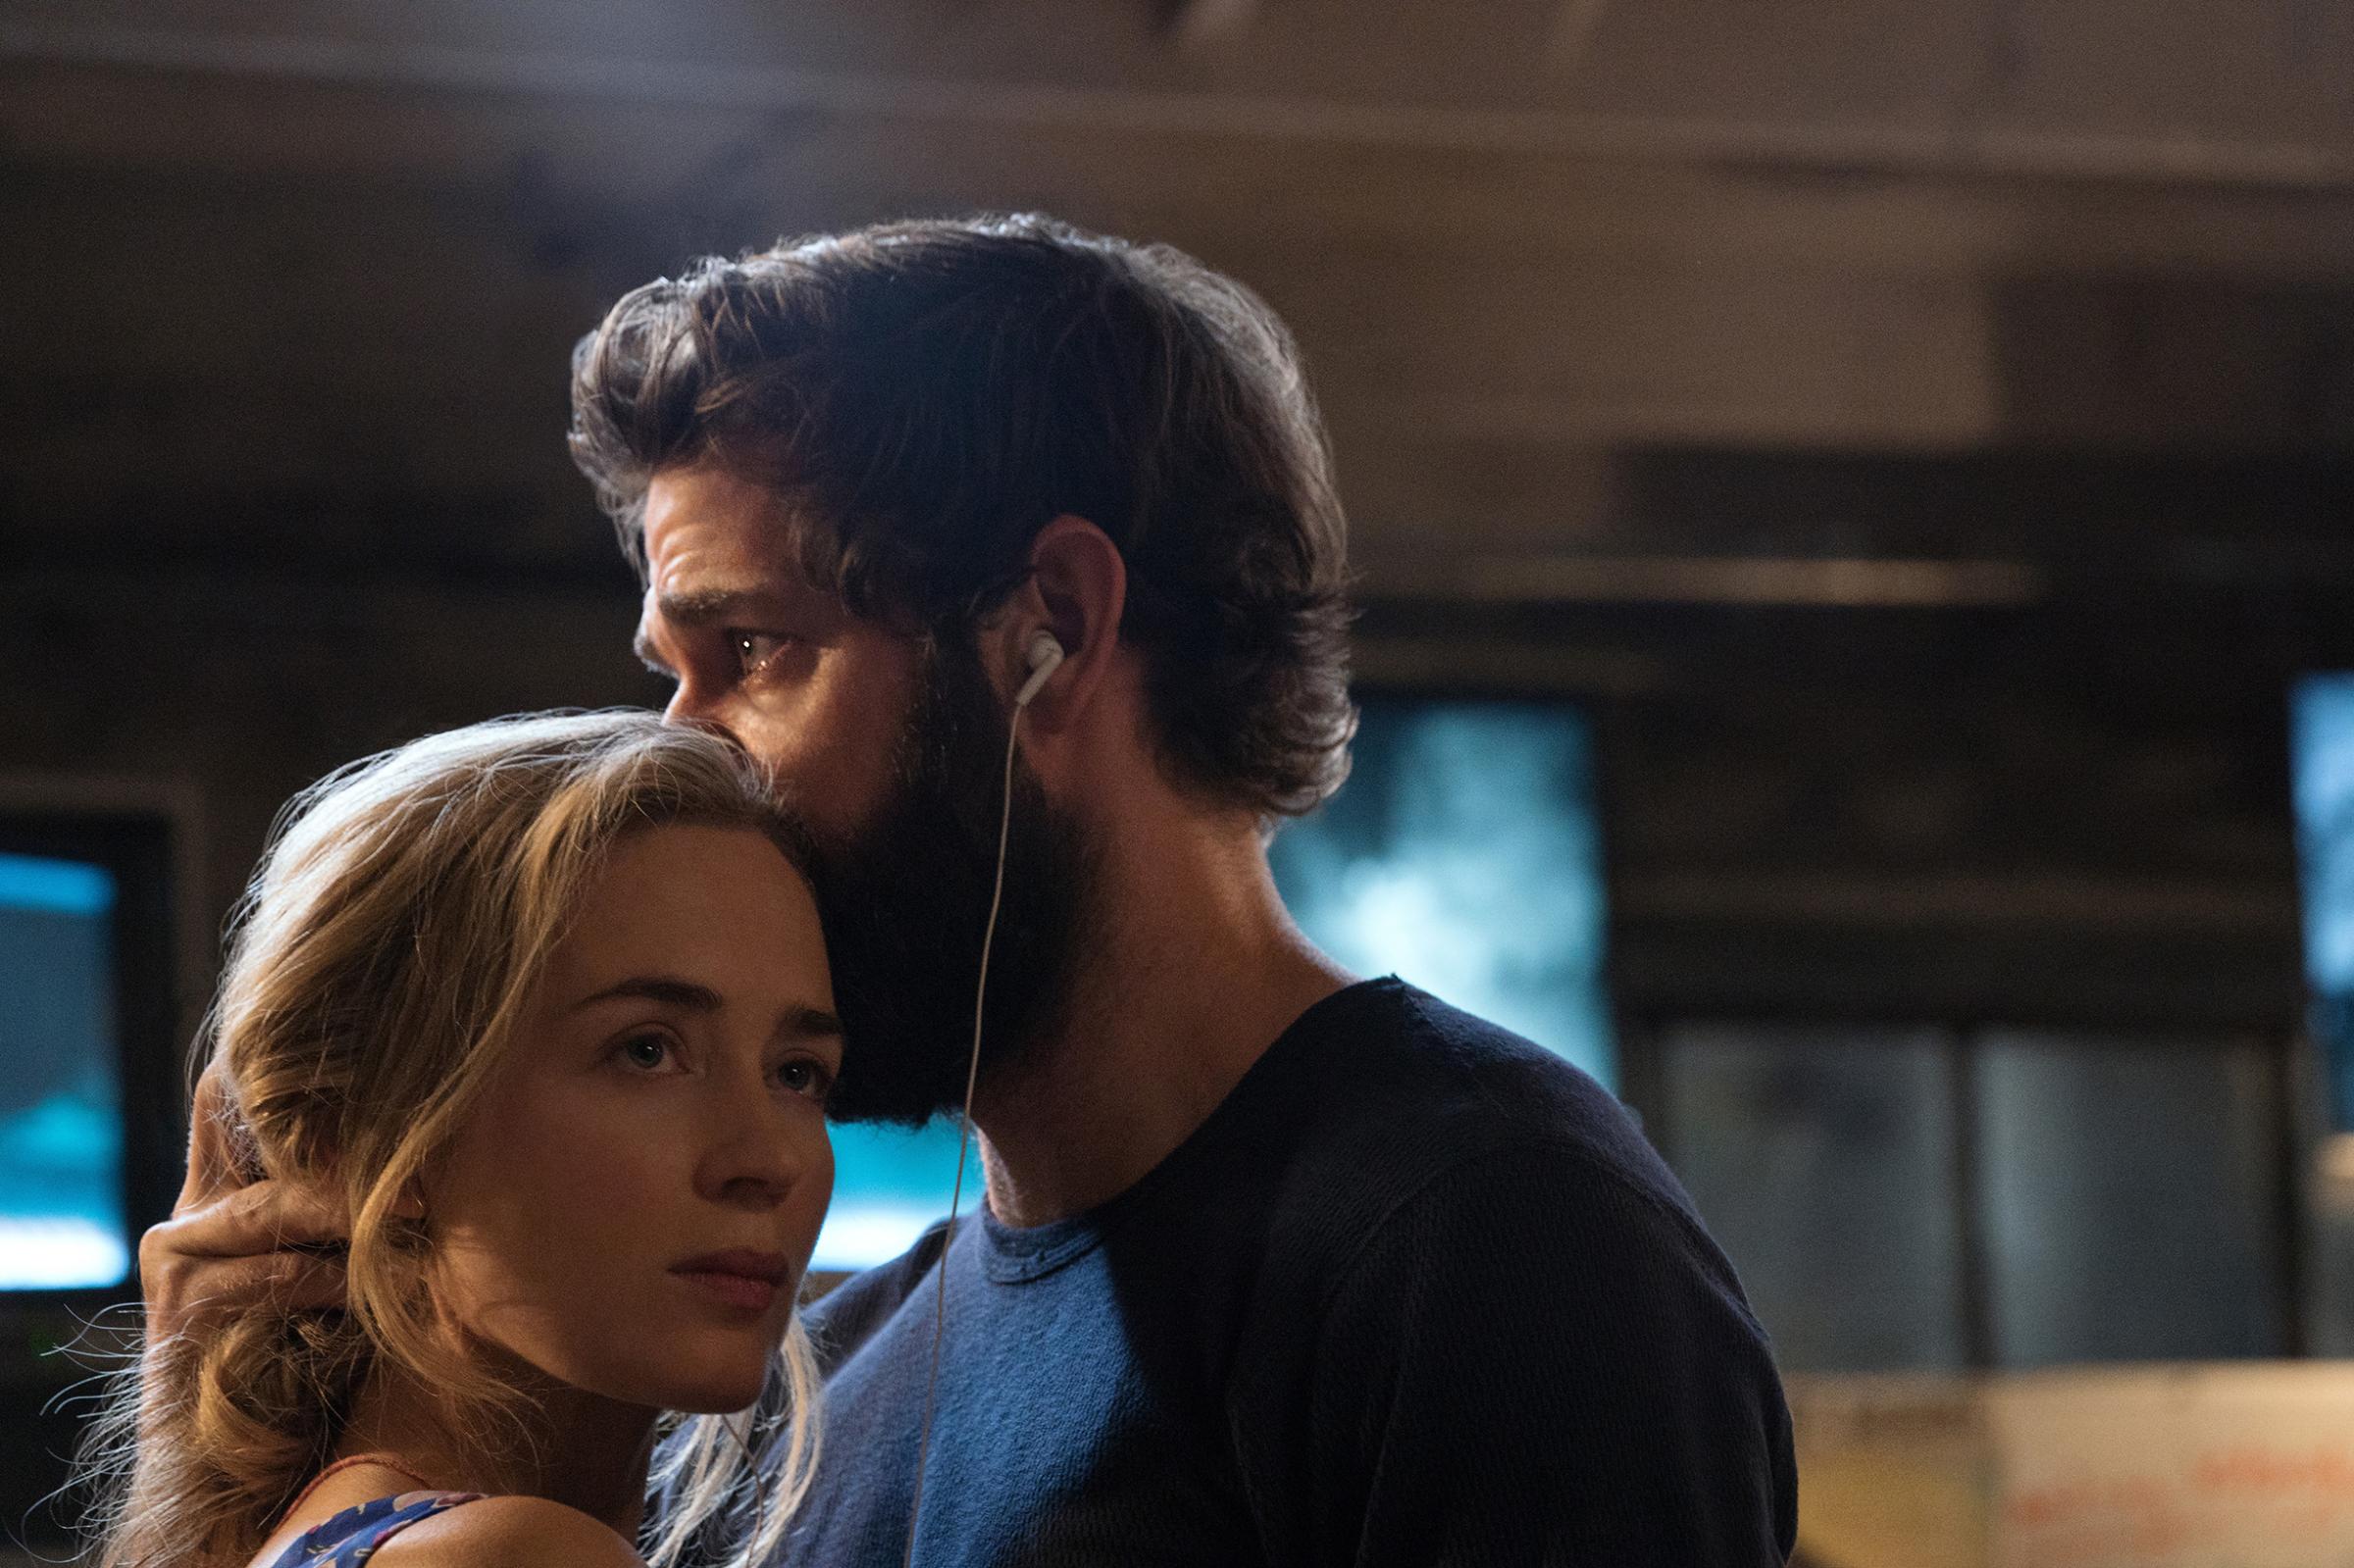 Emily Blunt and John Krasinski in 'A Quiet Place' from Paramount Pictures.